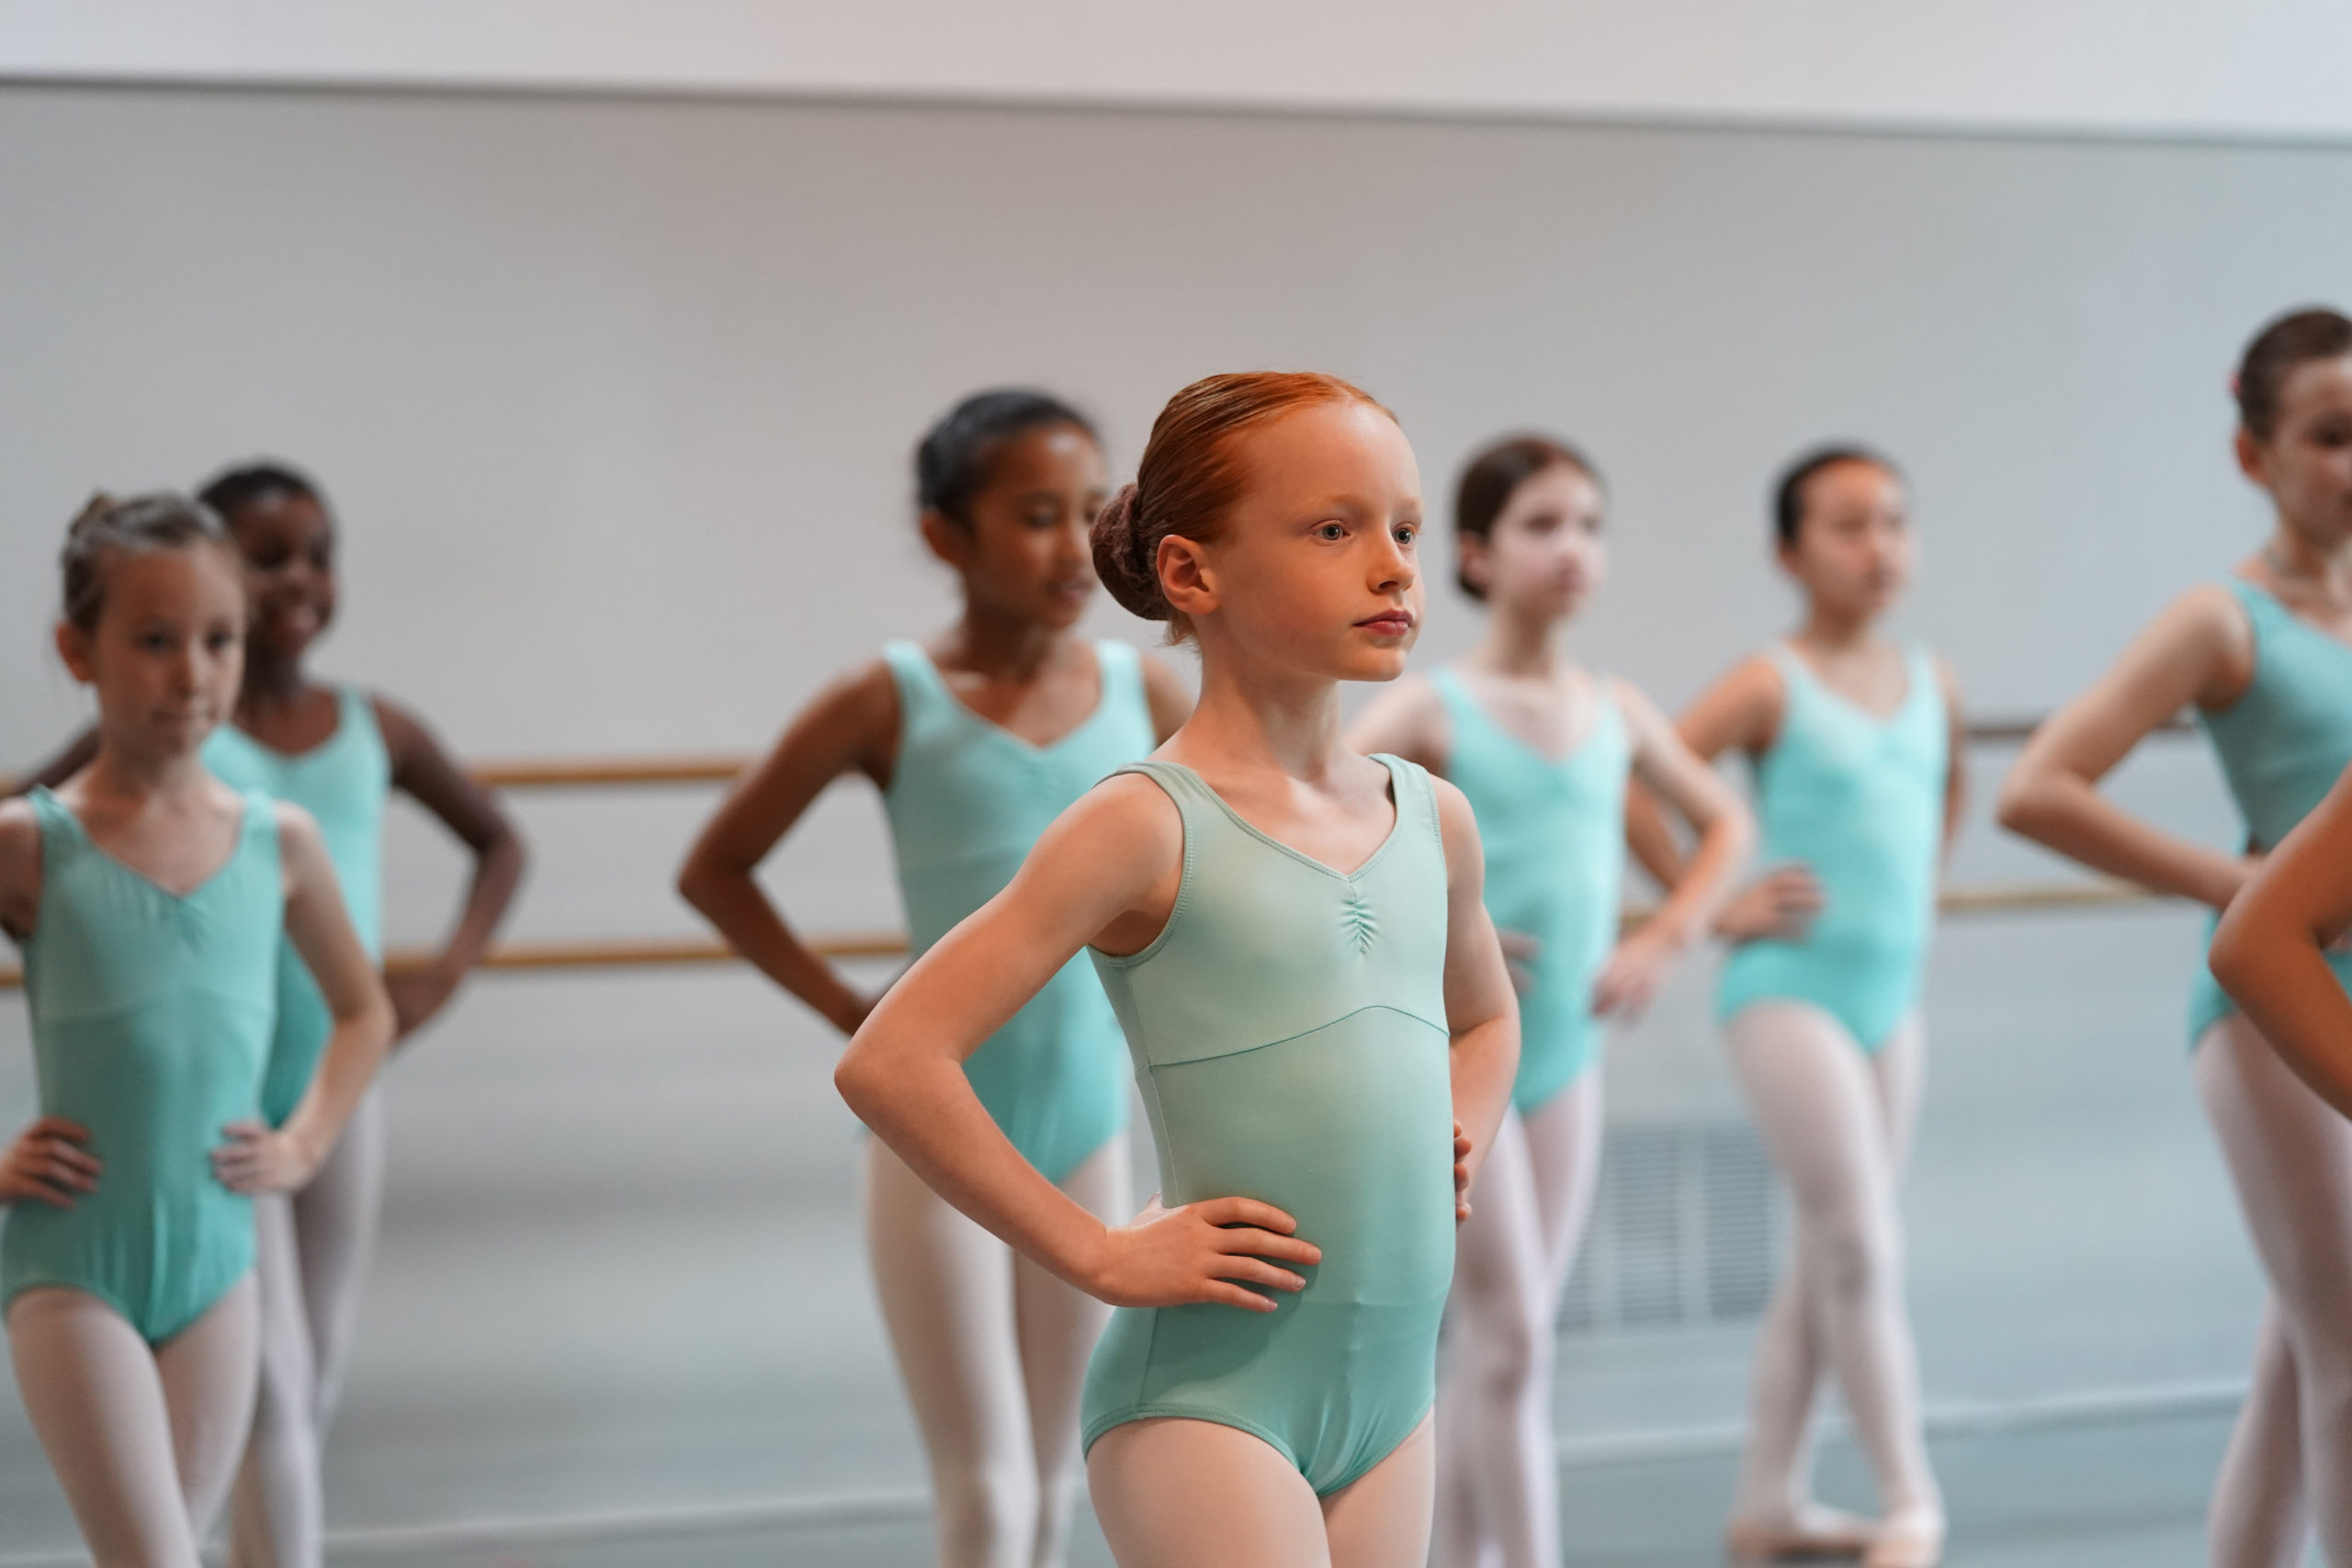 Youth class with students in teal leotards.